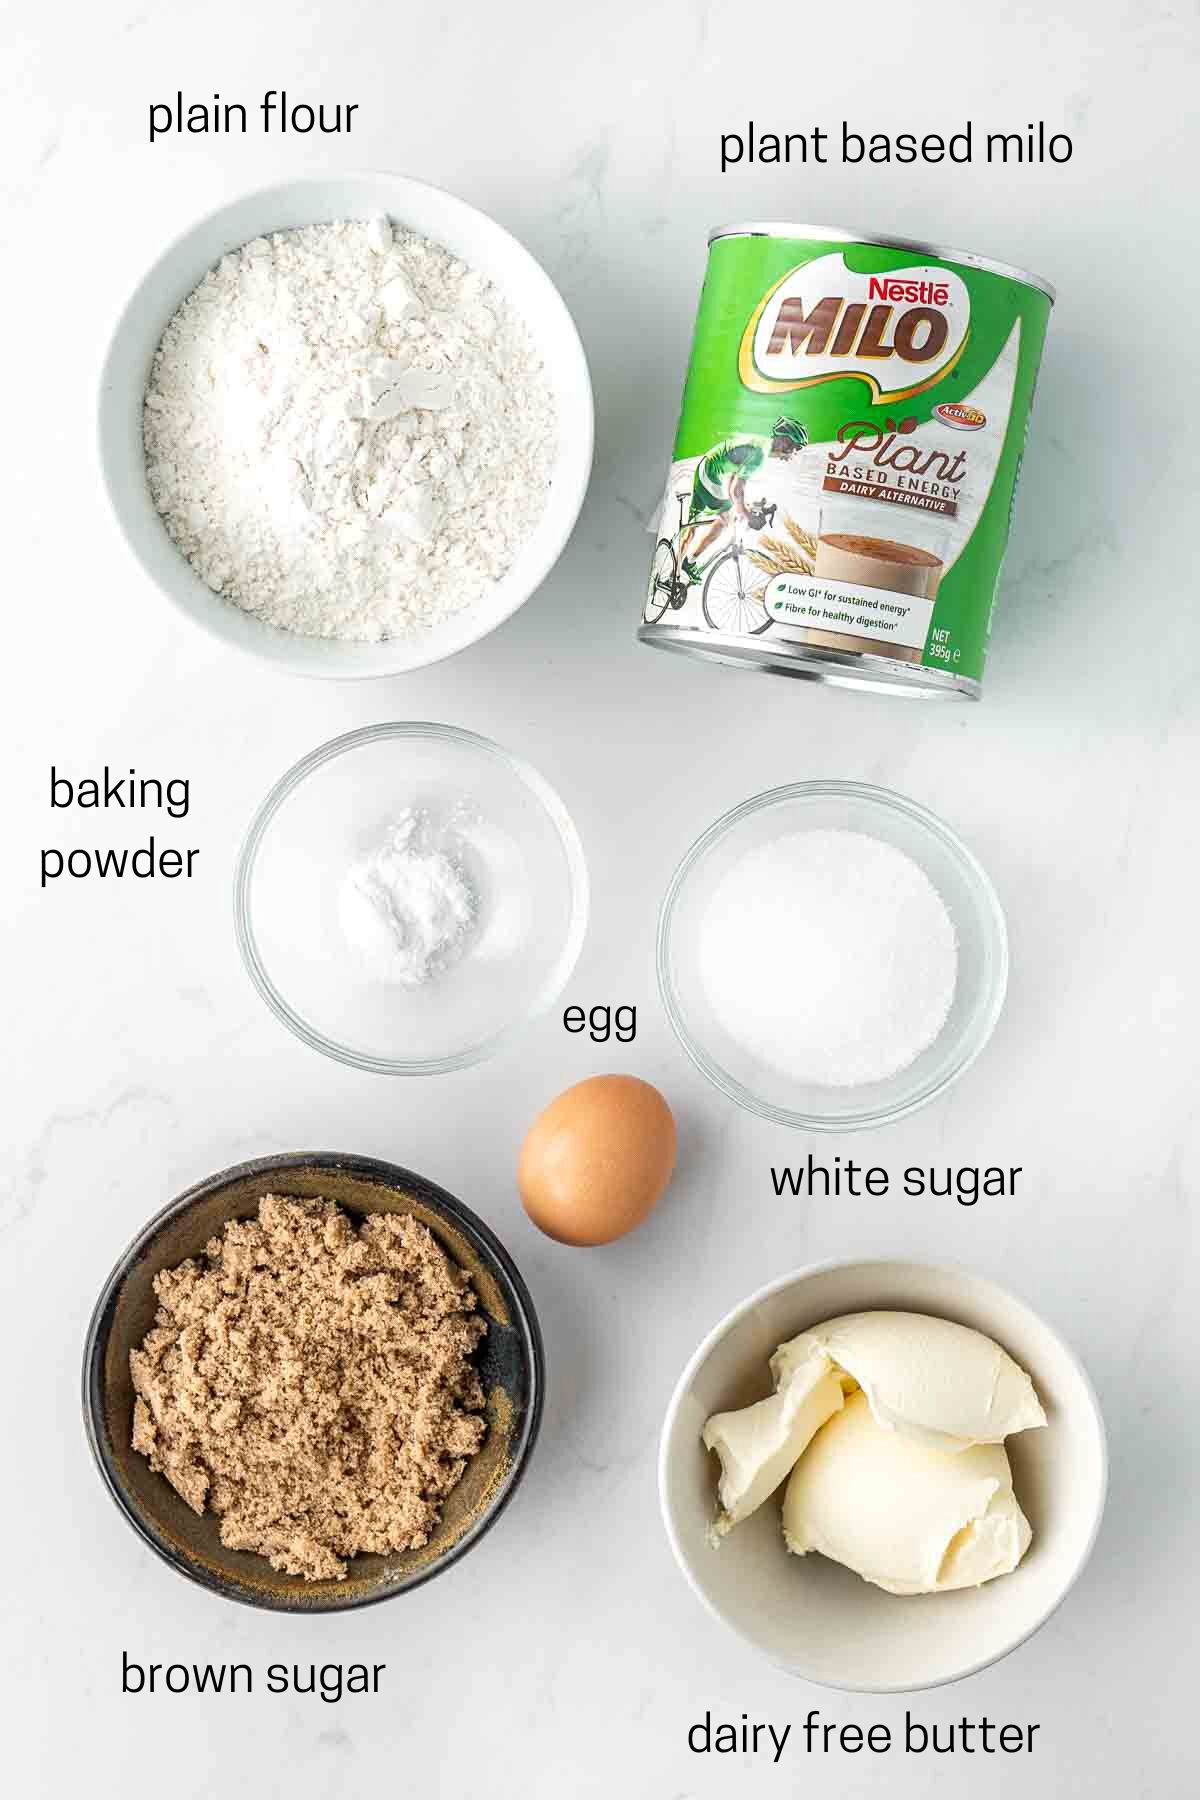 All ingredients needed to make milo biscuits laid out.